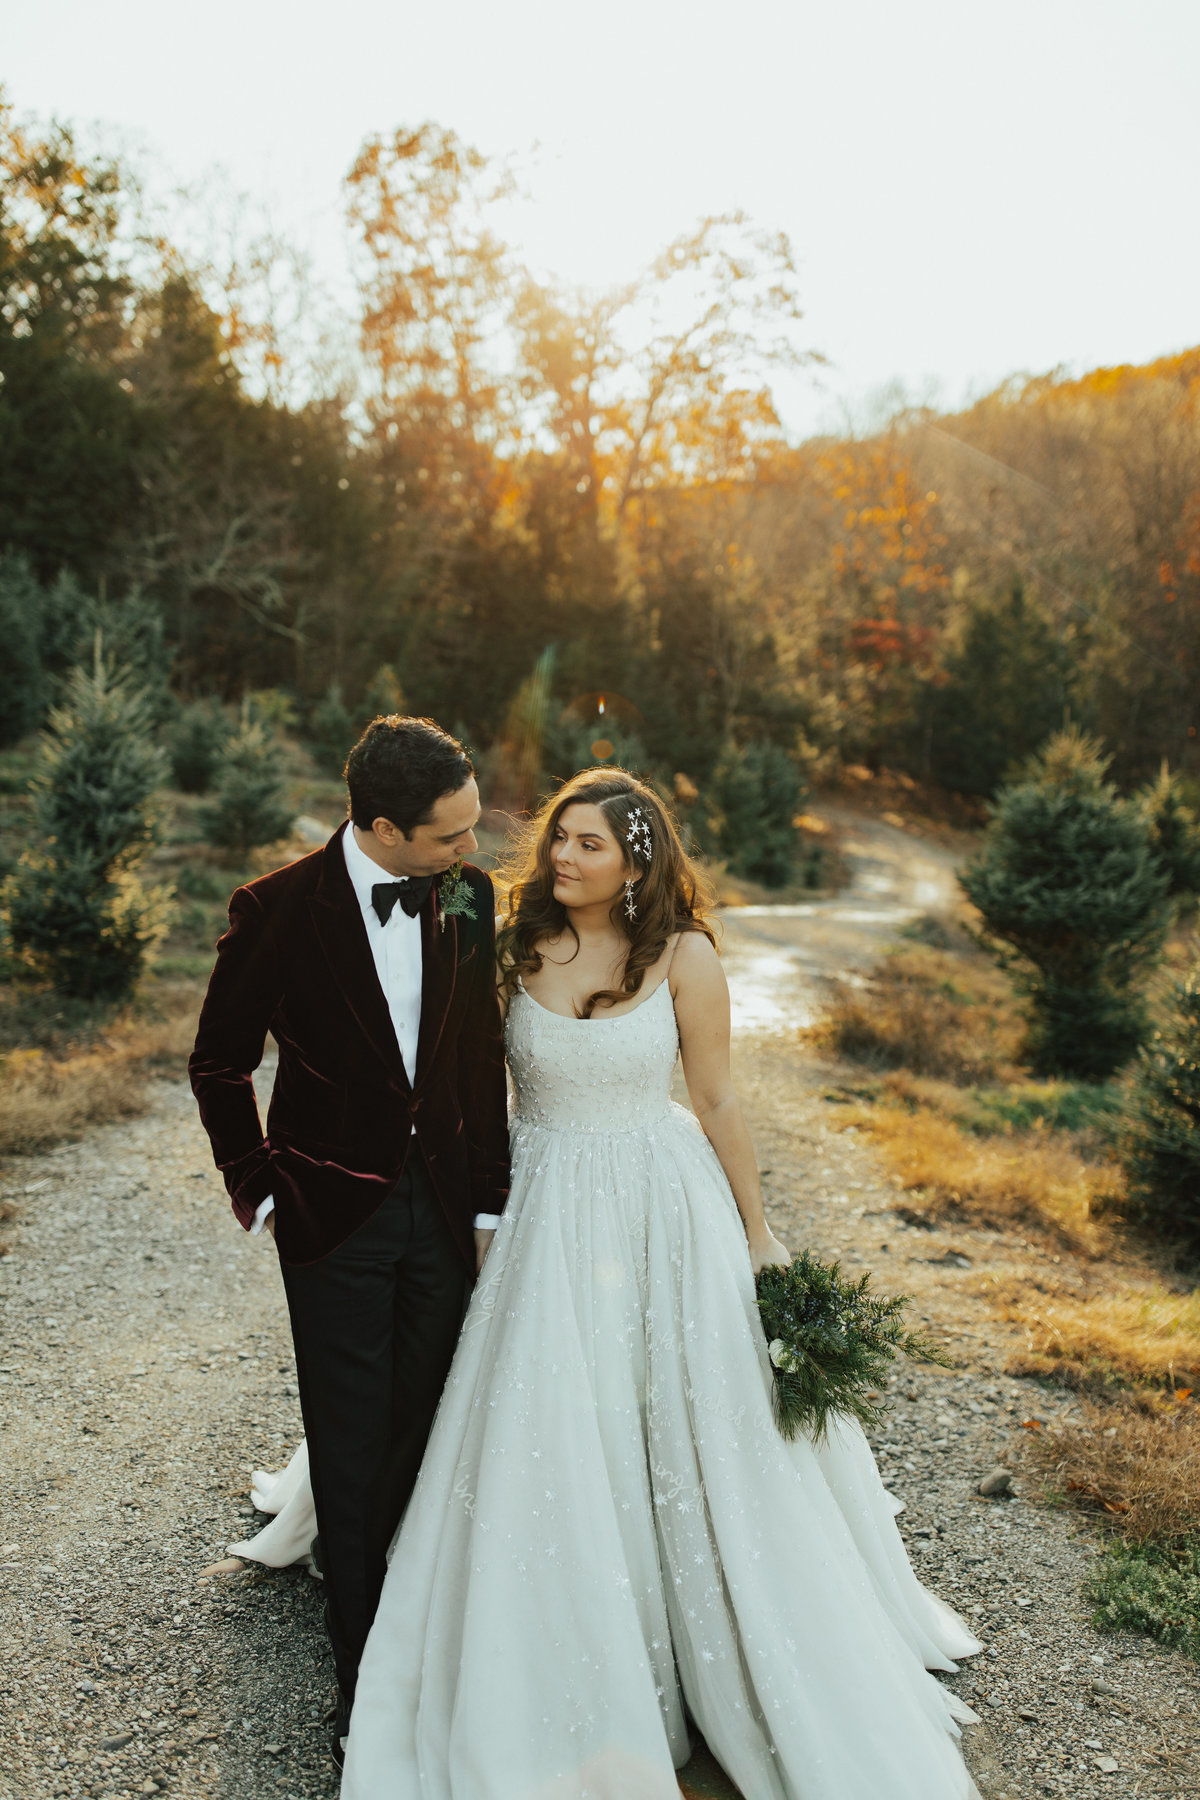 Christy-l-Johnston-Photography-Monica-Relyea-Events-Noelle-Downing-Instagram-Noelle_s-Favorite-Day-Wedding-Battenfelds-Christmas-tree-farm-Red-Hook-New-York-Hudson-Valley-upstate-november-2019-AP1A8047